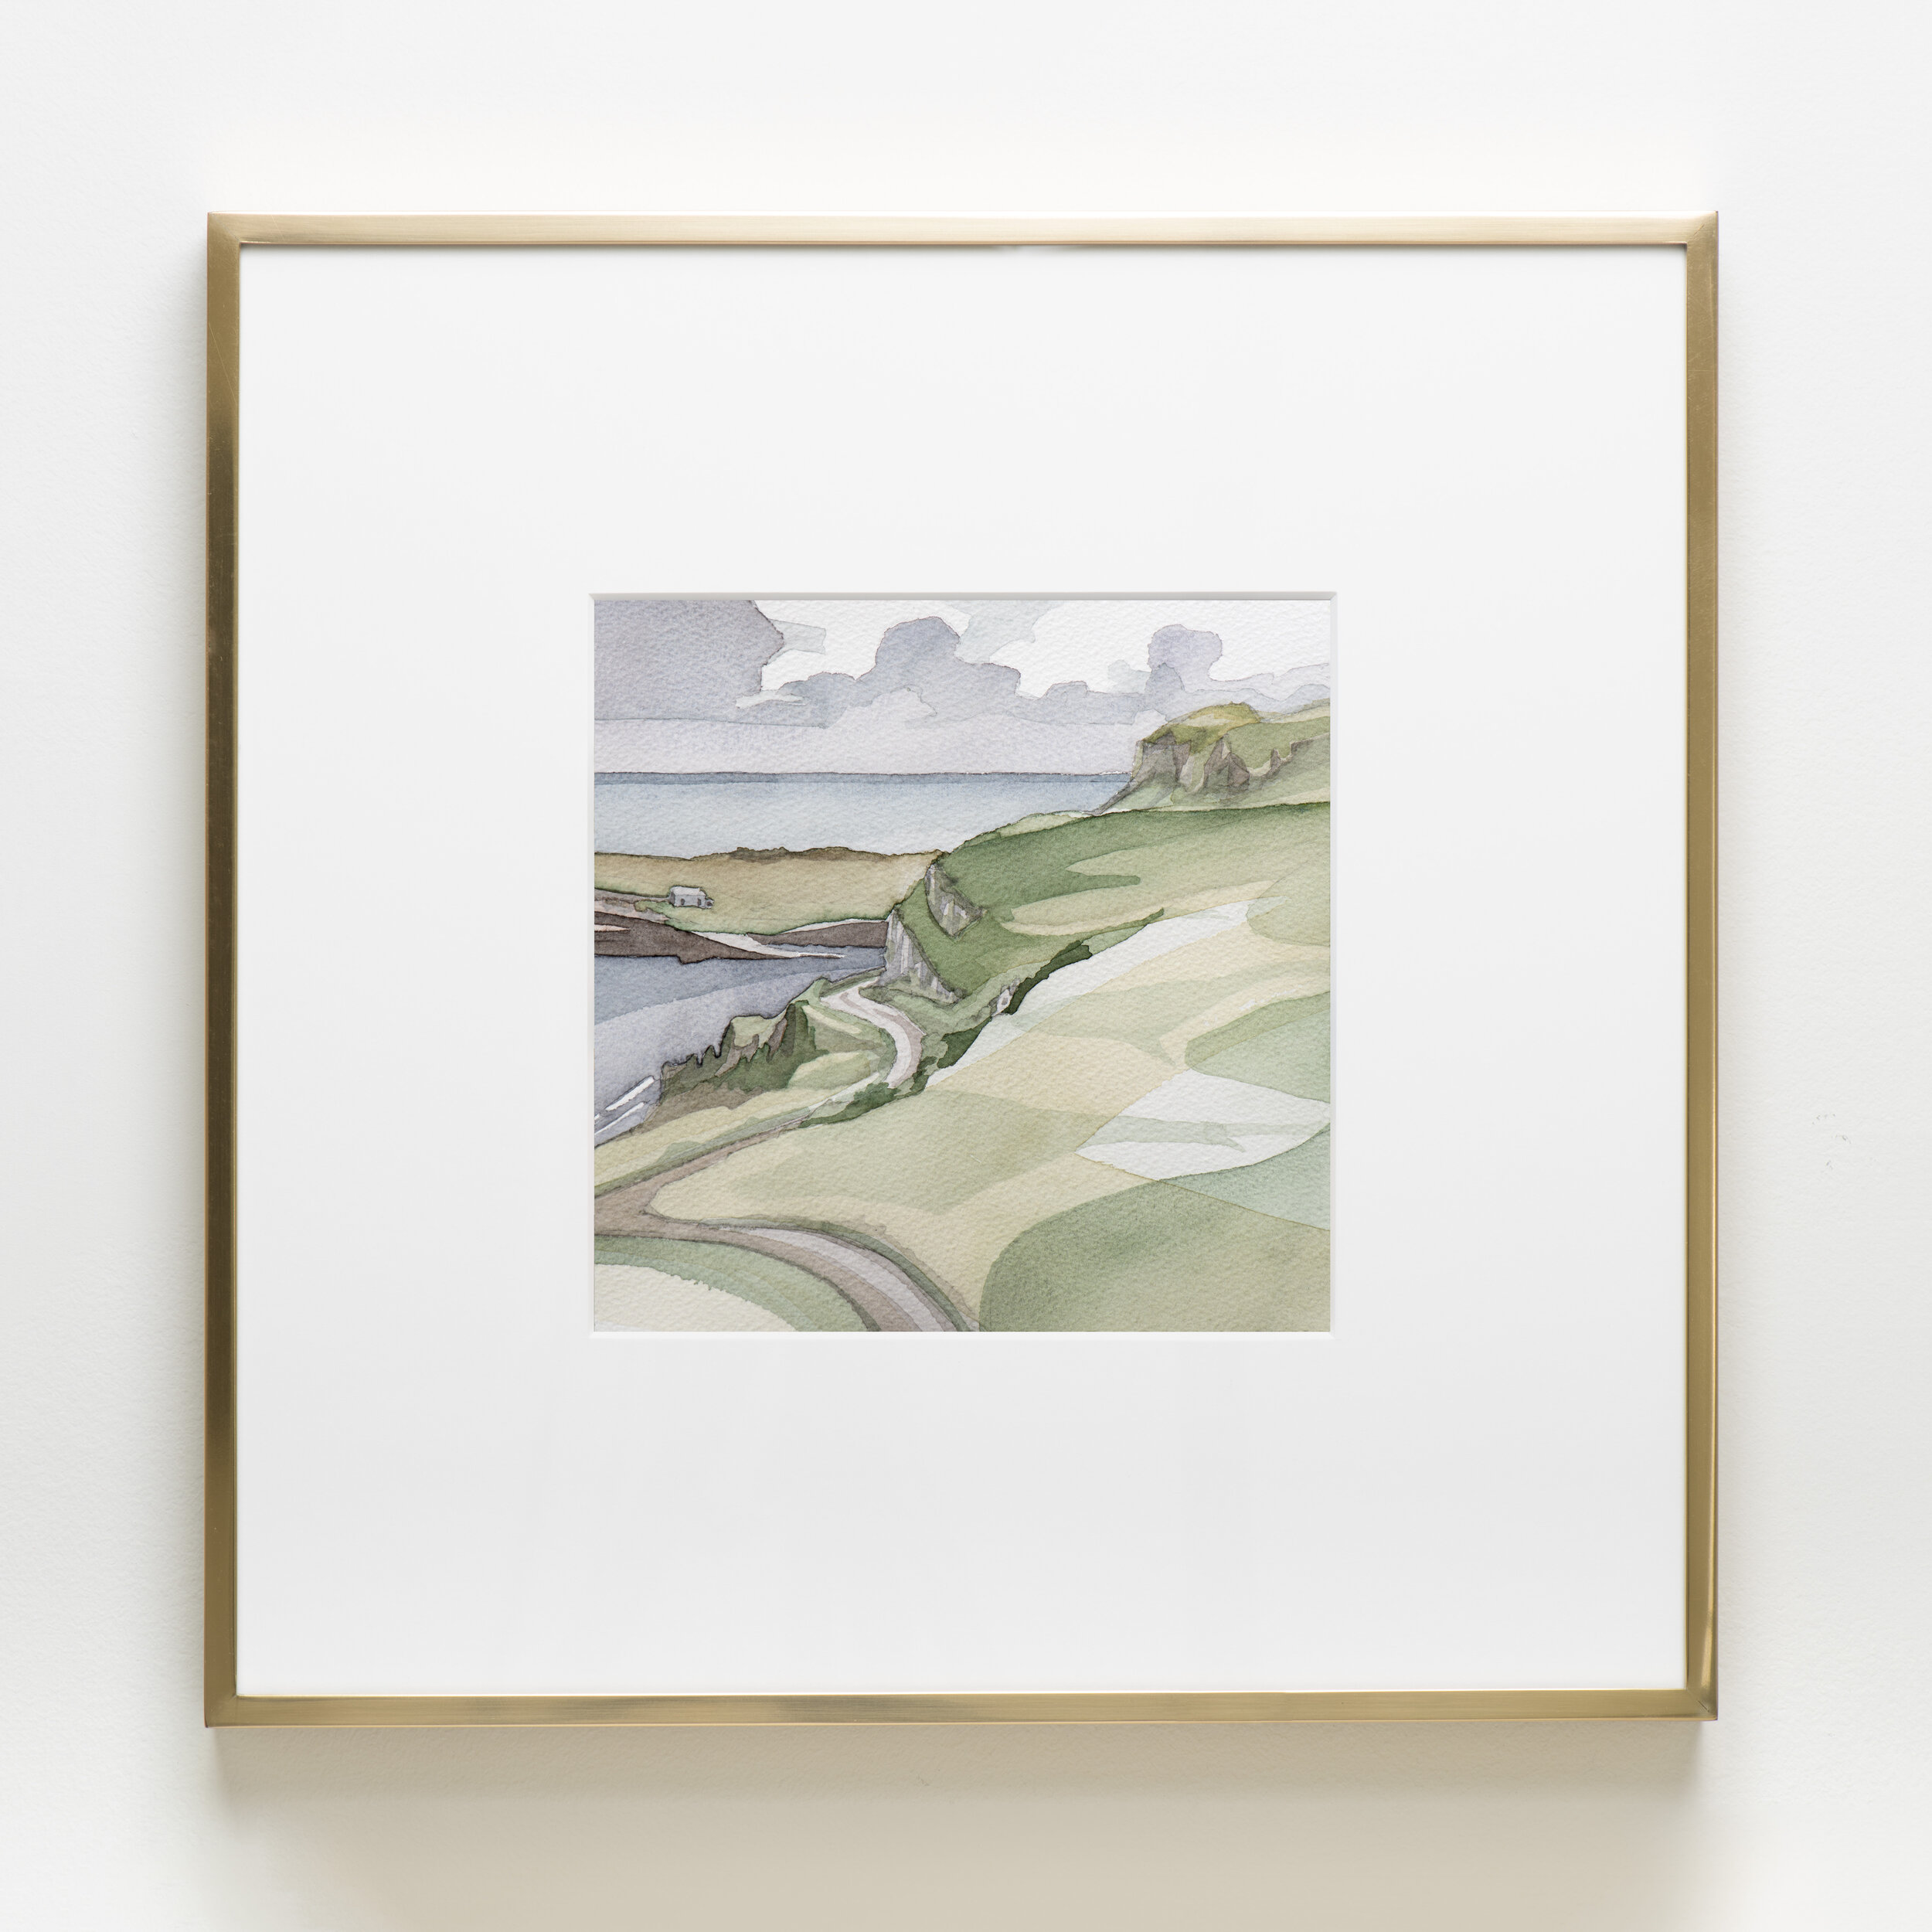   Staffin Bay , 2018 Watercolor on paper 16 1/4 x 16 1/4 inches (framed) 